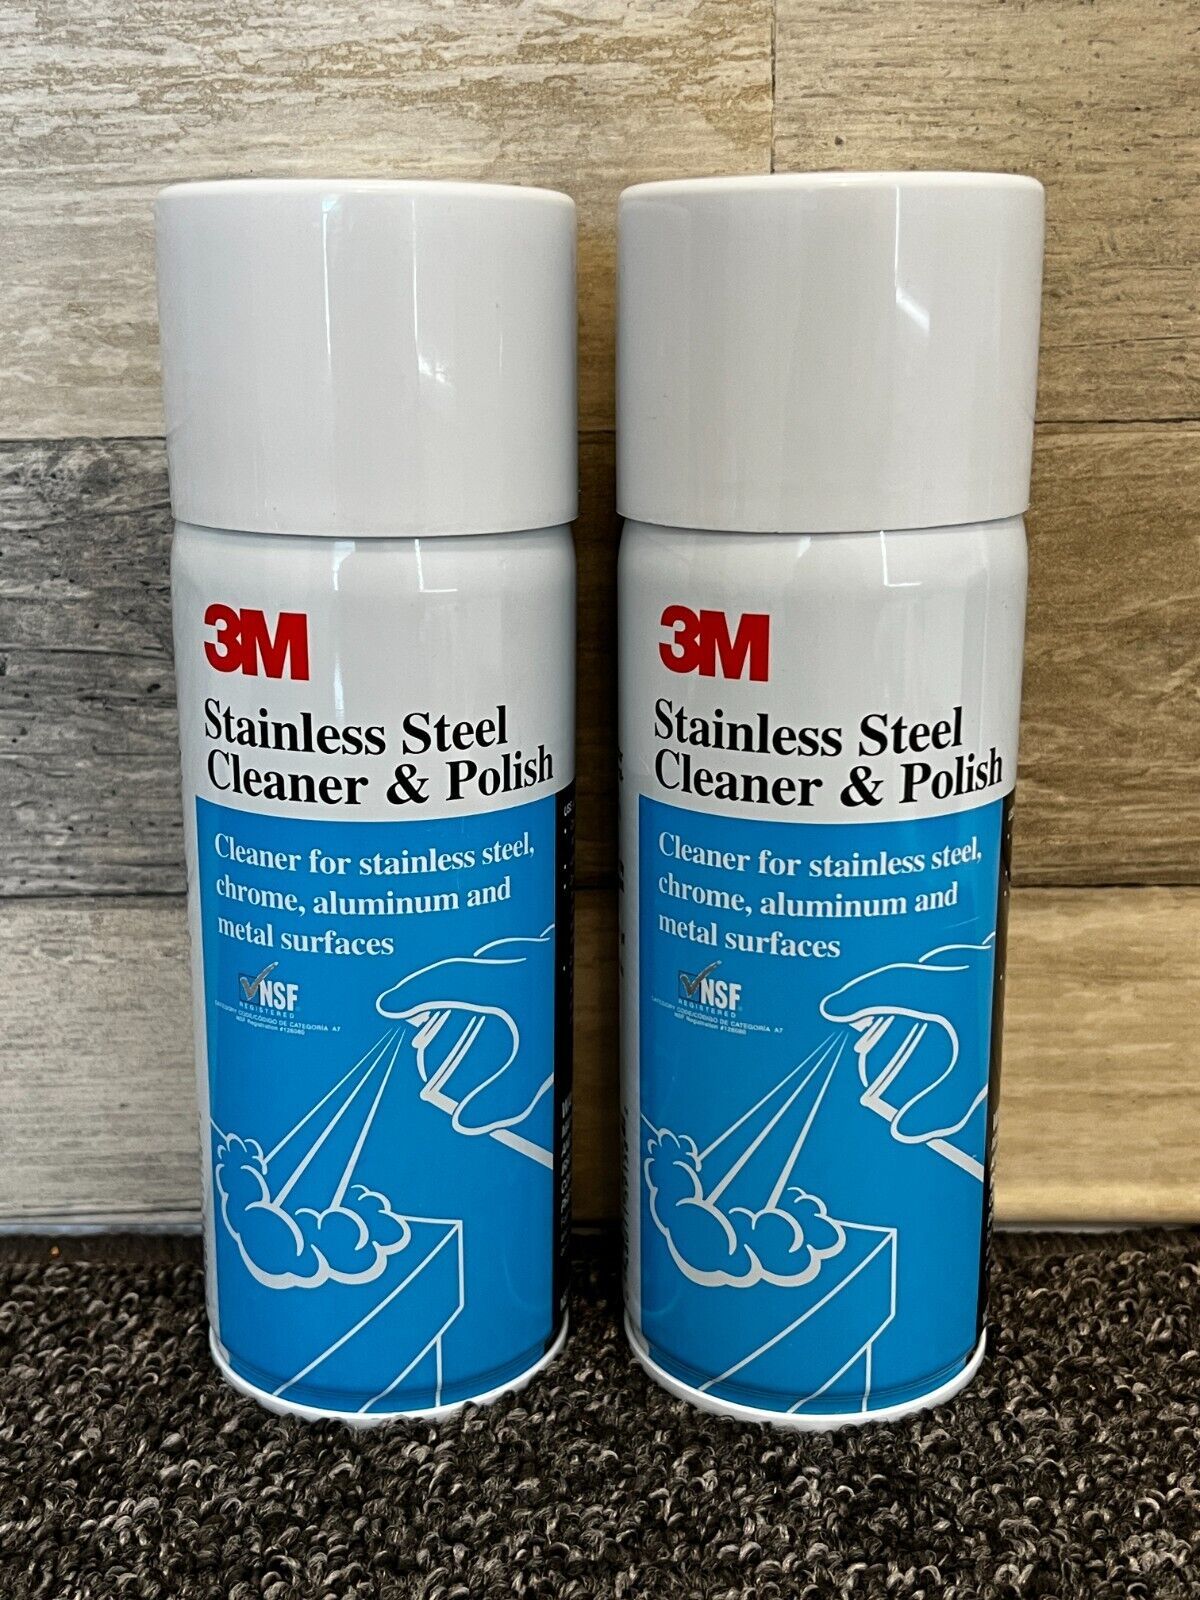 Primary image for 3M Stainless Steel Cleaner & Polish Lime Scent - Lot of 2 - 10 oz. Cans -